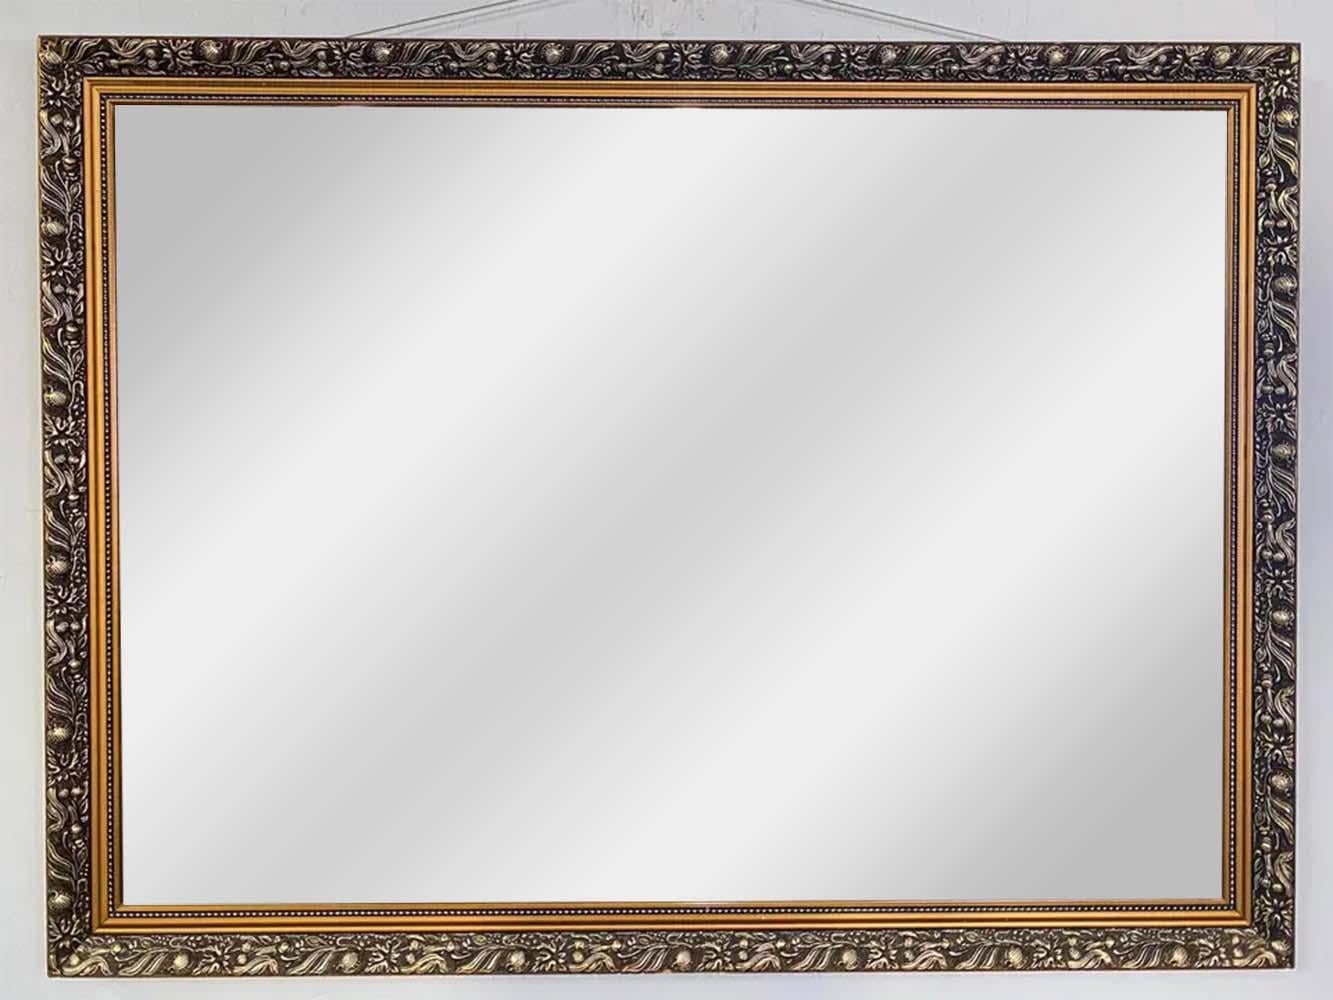 A beautiful and elegant French style mirror. In a rectangular shape, the mirror is hand carved of gilt wood and shows fine details. The mirror features a beveled glass and is sturdy. Simple and elegant, The mirror will elevate the style of any room